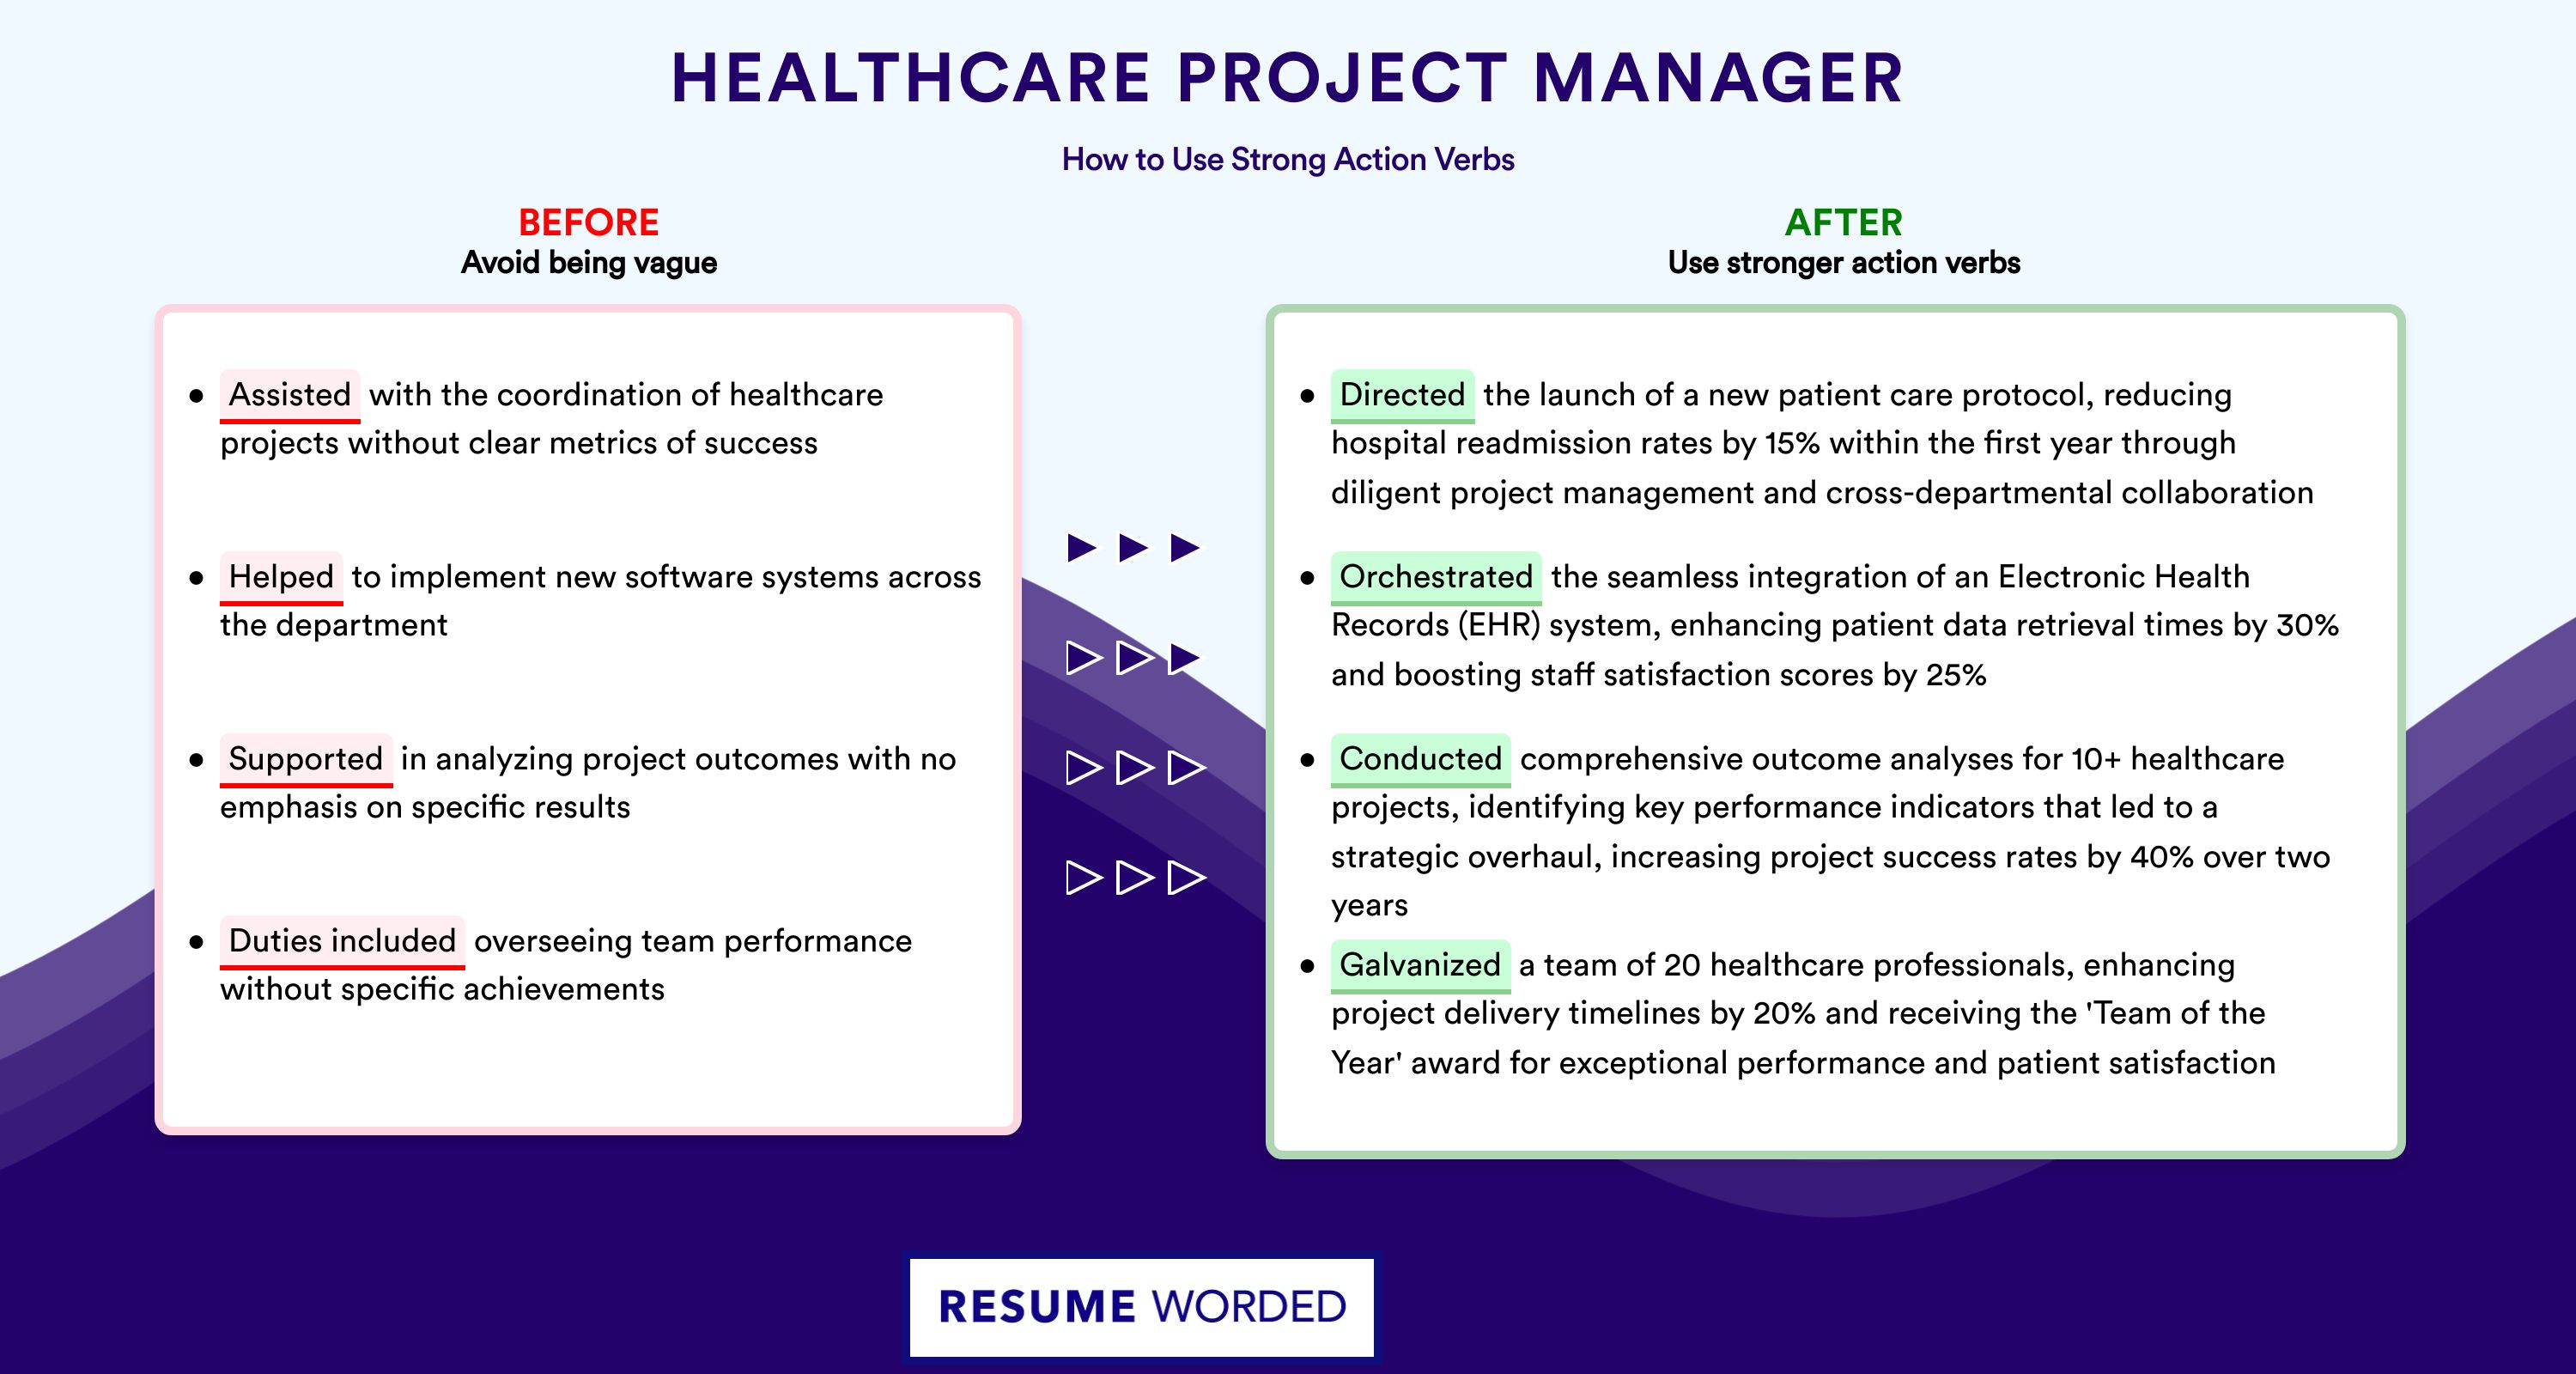 Action Verbs for Healthcare Project Manager